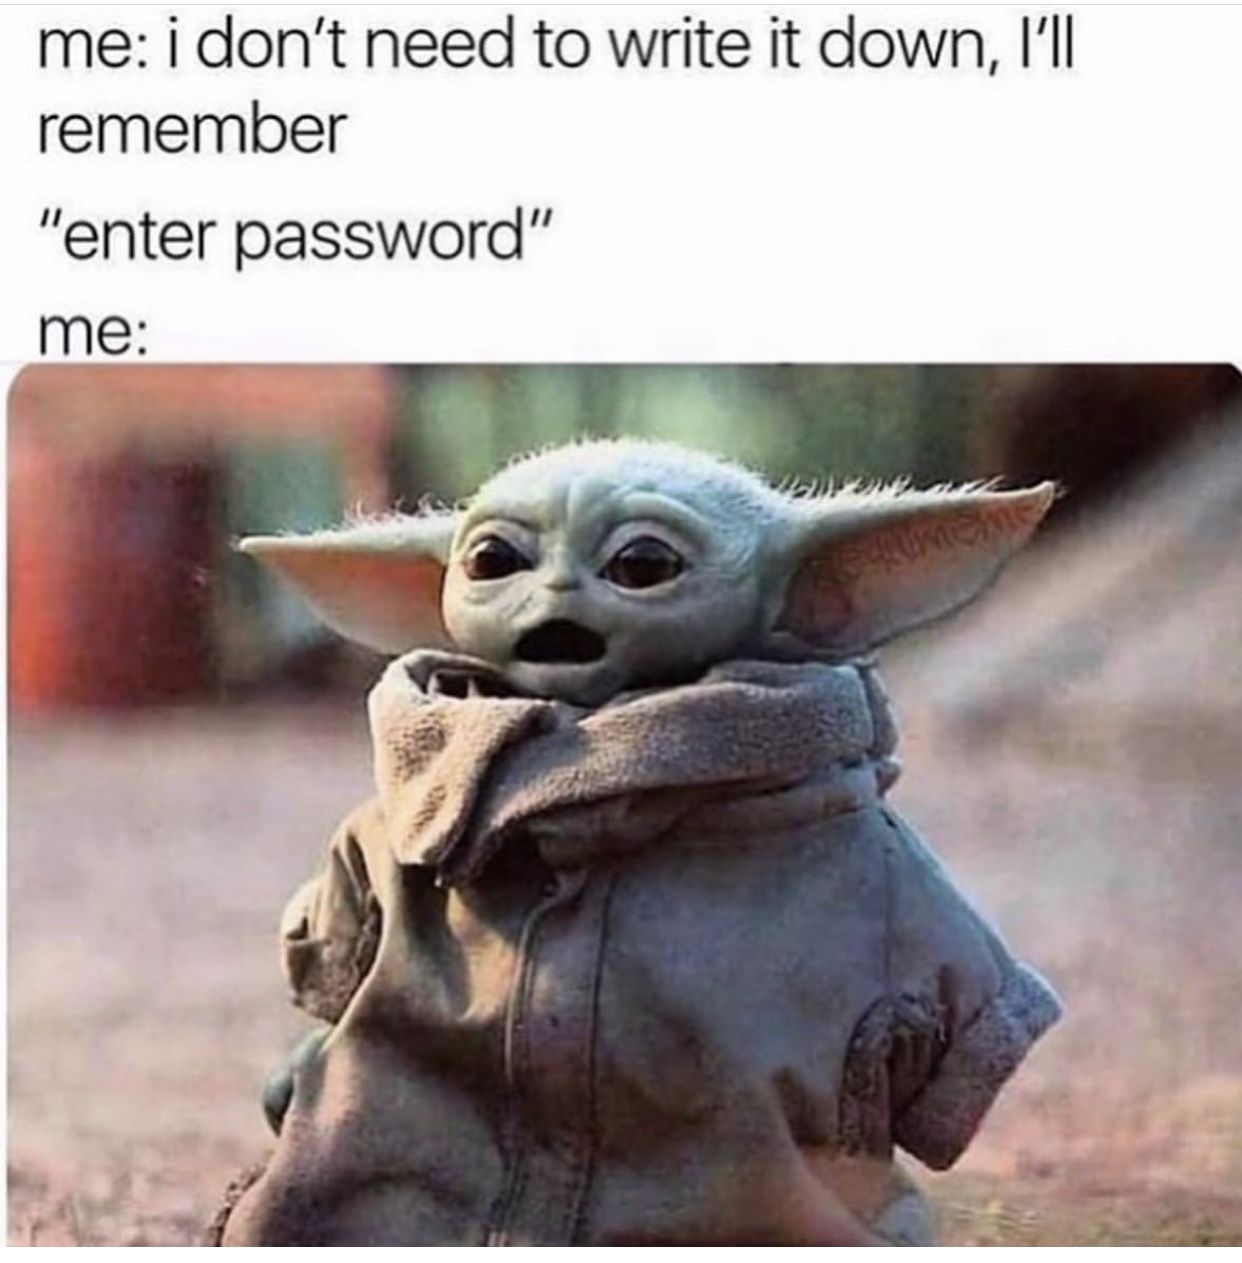 no i don t need anything - me i don't need to write it down, I'll remember "enter password" me